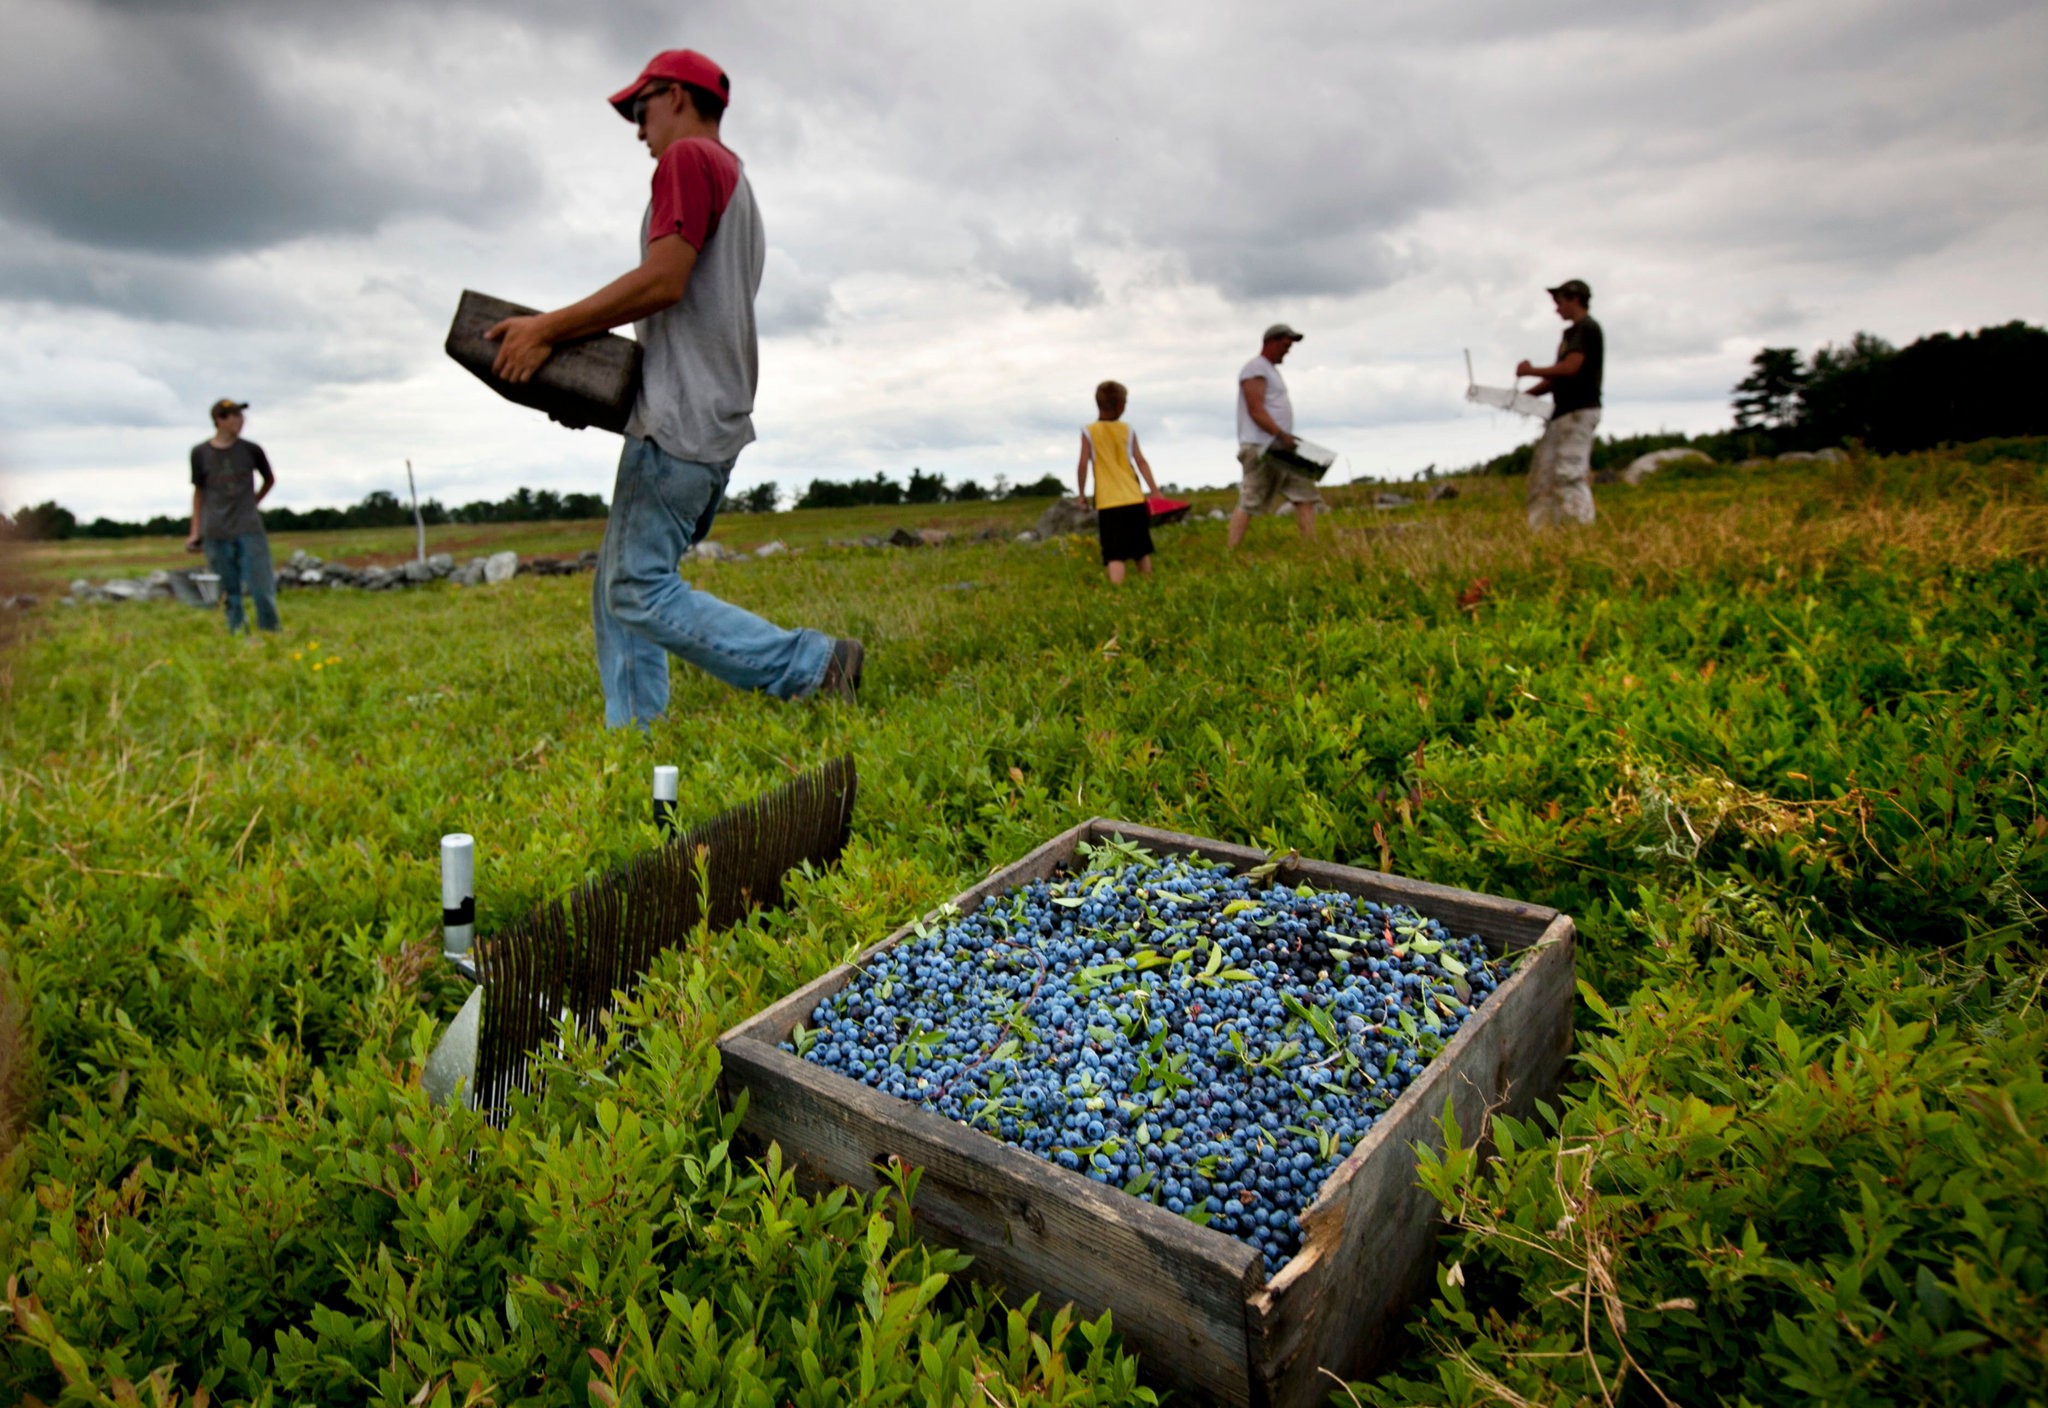 Erratic weather is a threat to the wild blueberry crop in Maine, where some fields are a century old.CreditRobert F. Bukaty/Associated Press